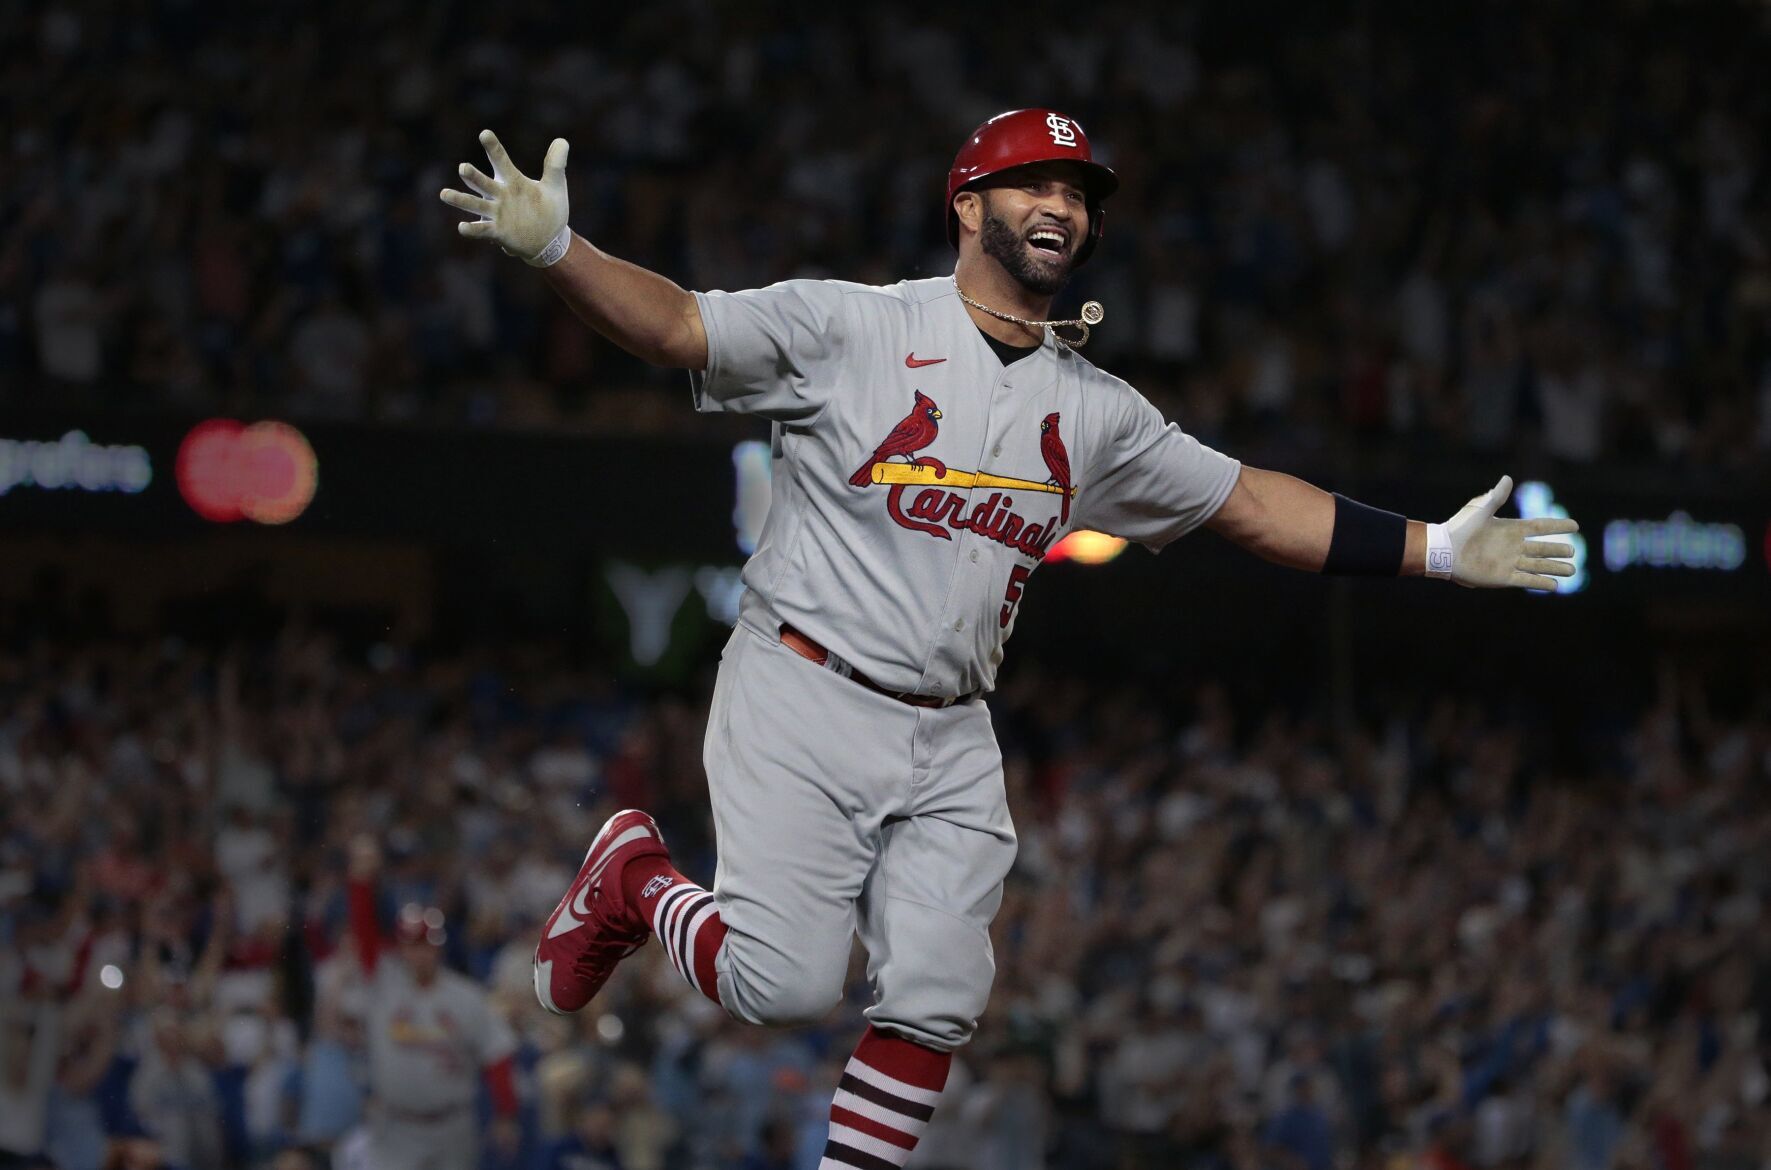 A-Rod Pujols storybook ending gives Cardinals fans reminder of modern-day Musial